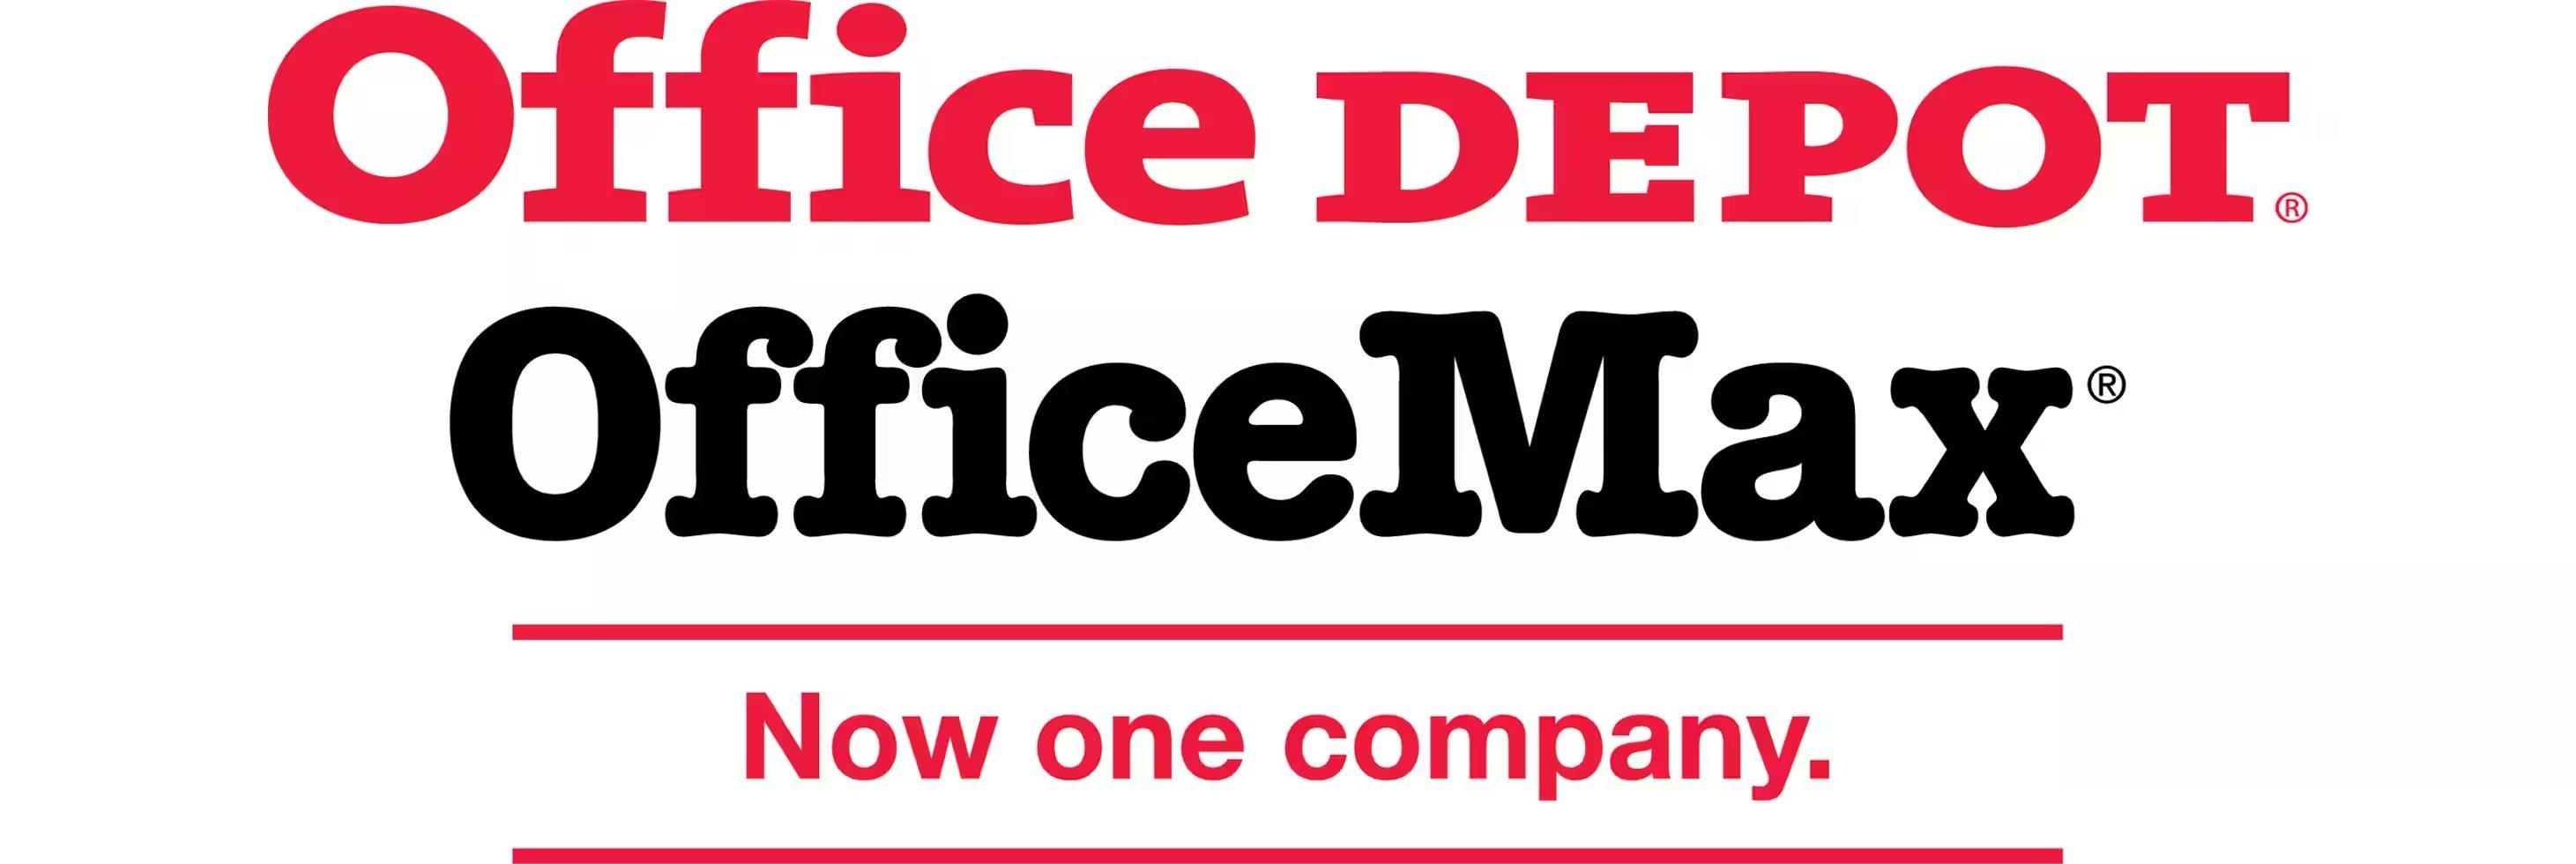 Office Depot and Office Max logo with text in red that reads Now one company.